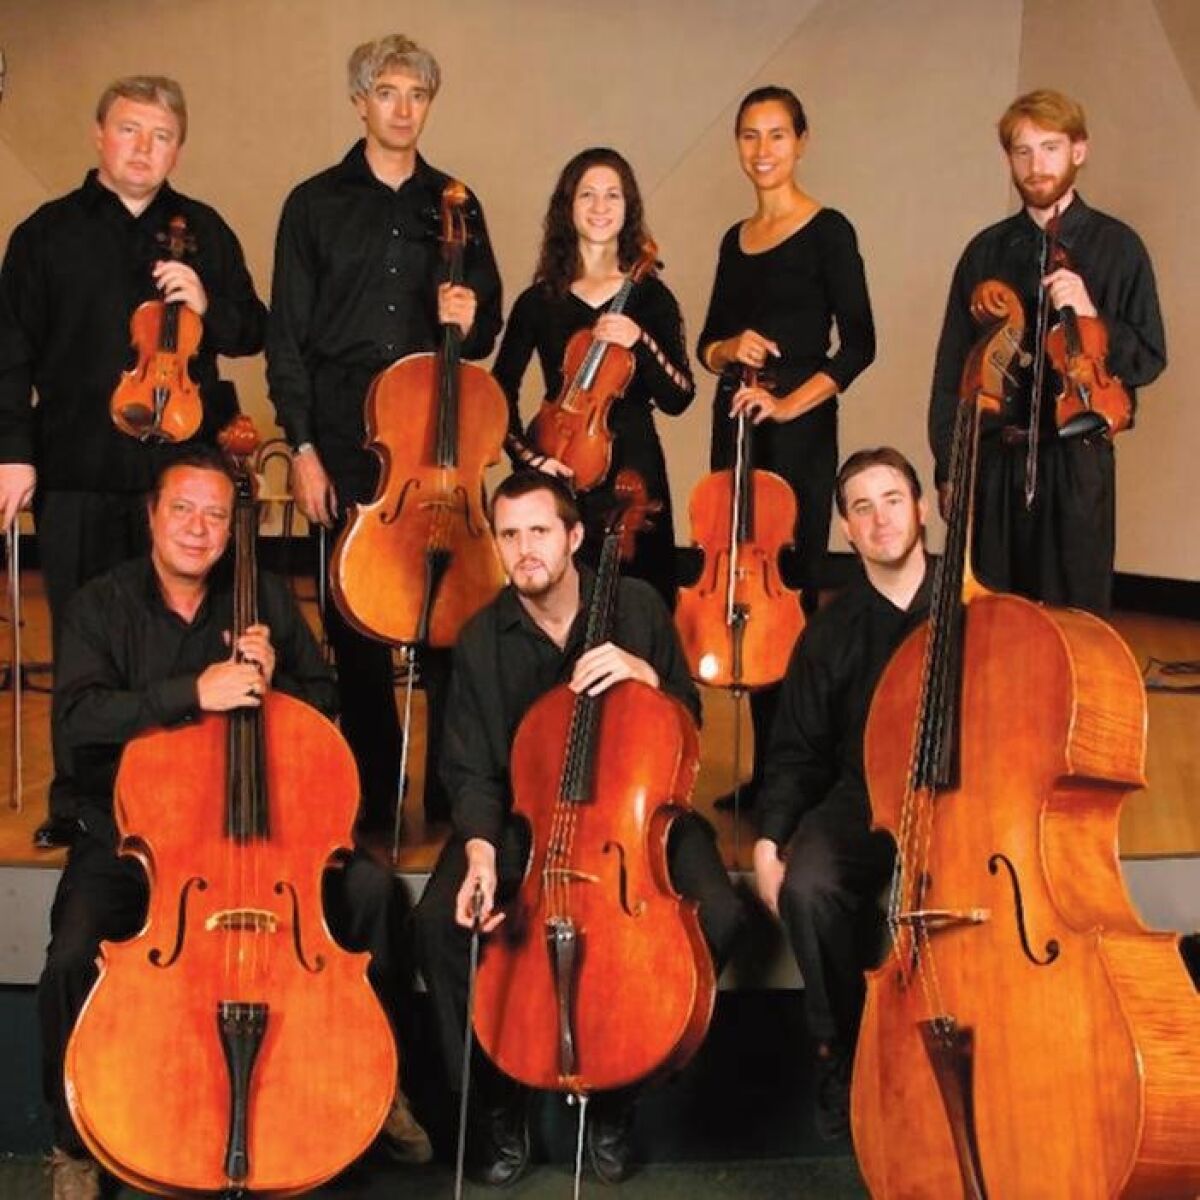 The Hutchins Consort will perform Friday, Nov. 8 at St. Andrew’s Episcopal Church.